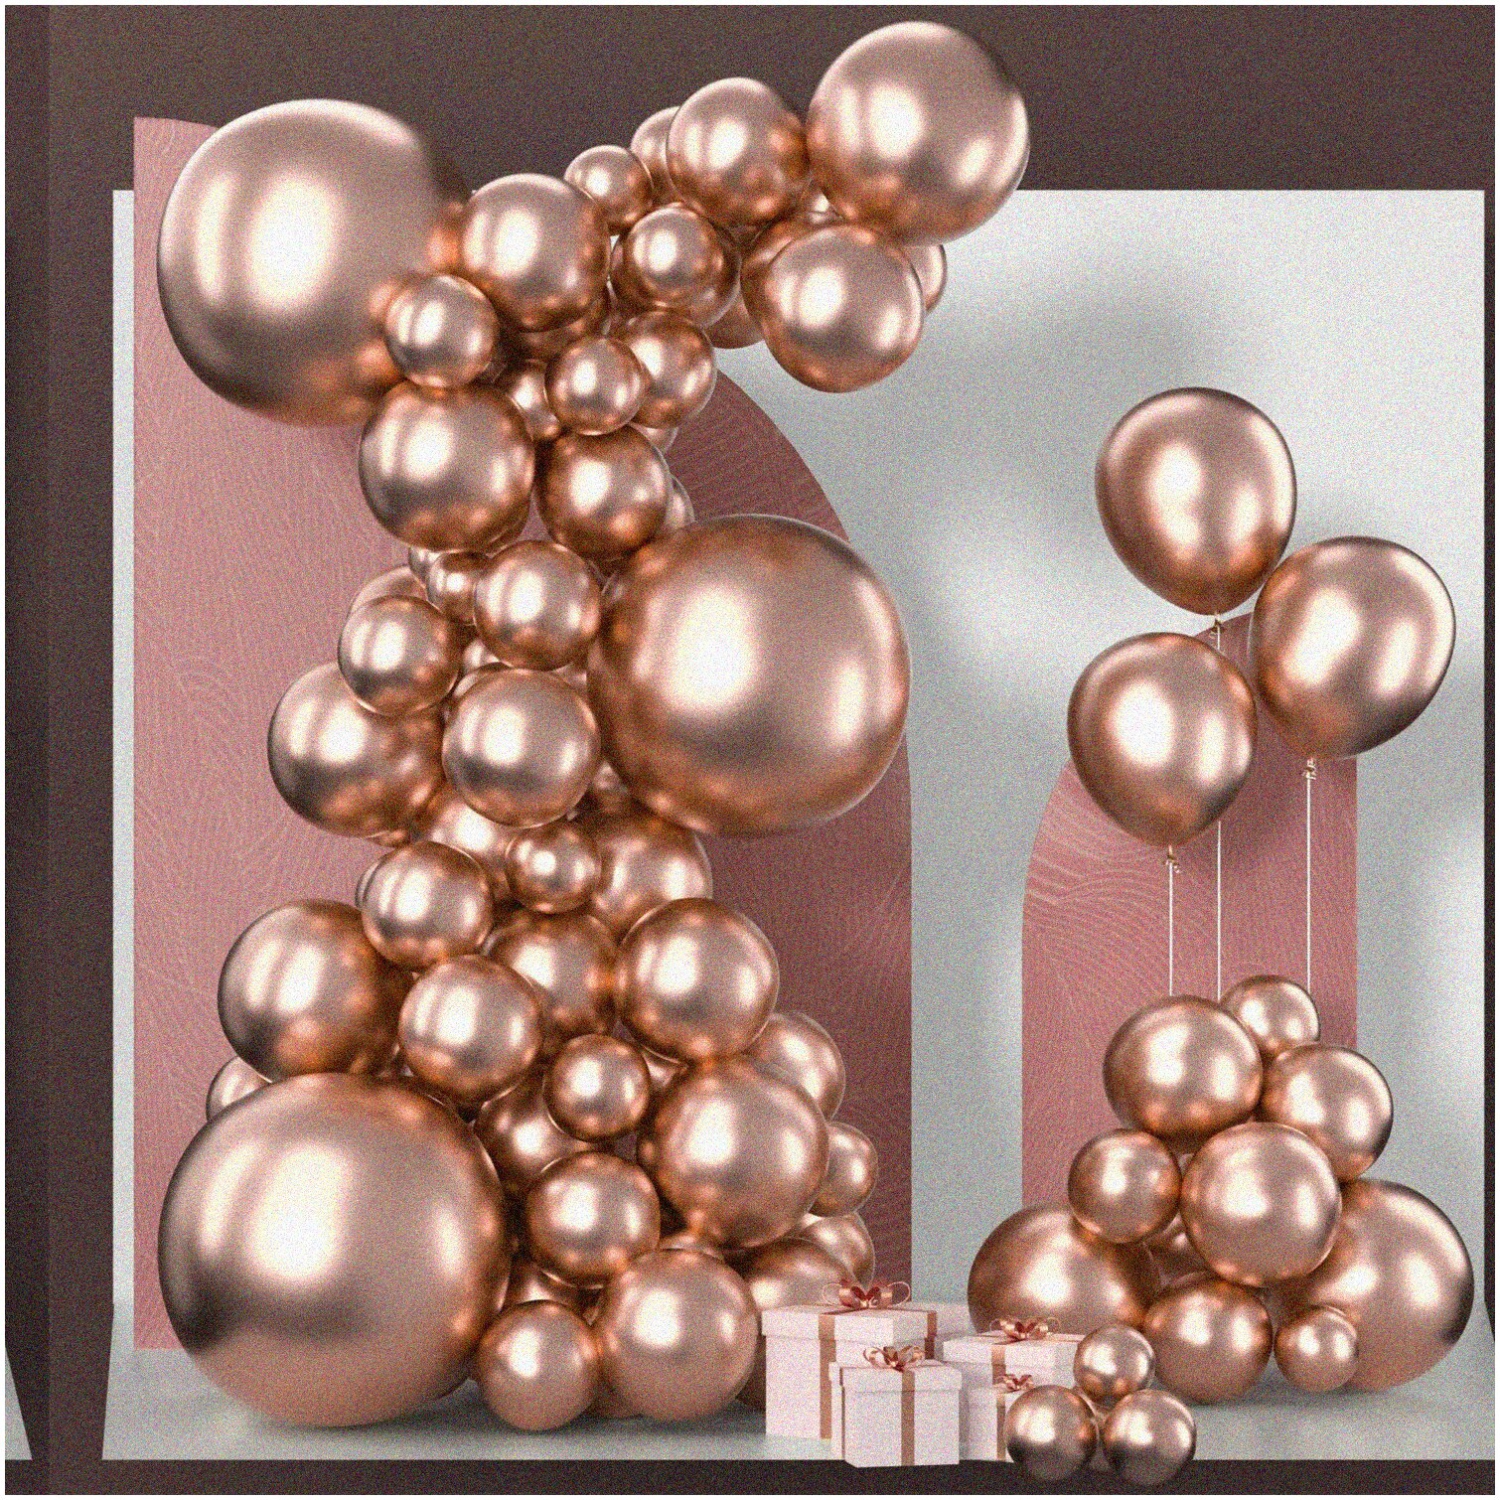 Rose Gold Shimmer Balloon Collection - 100 pcs Metallic Balloons in 18, 12, 10, and 5 Inch Sizes for Stunning Balloon Arches and Party Decor